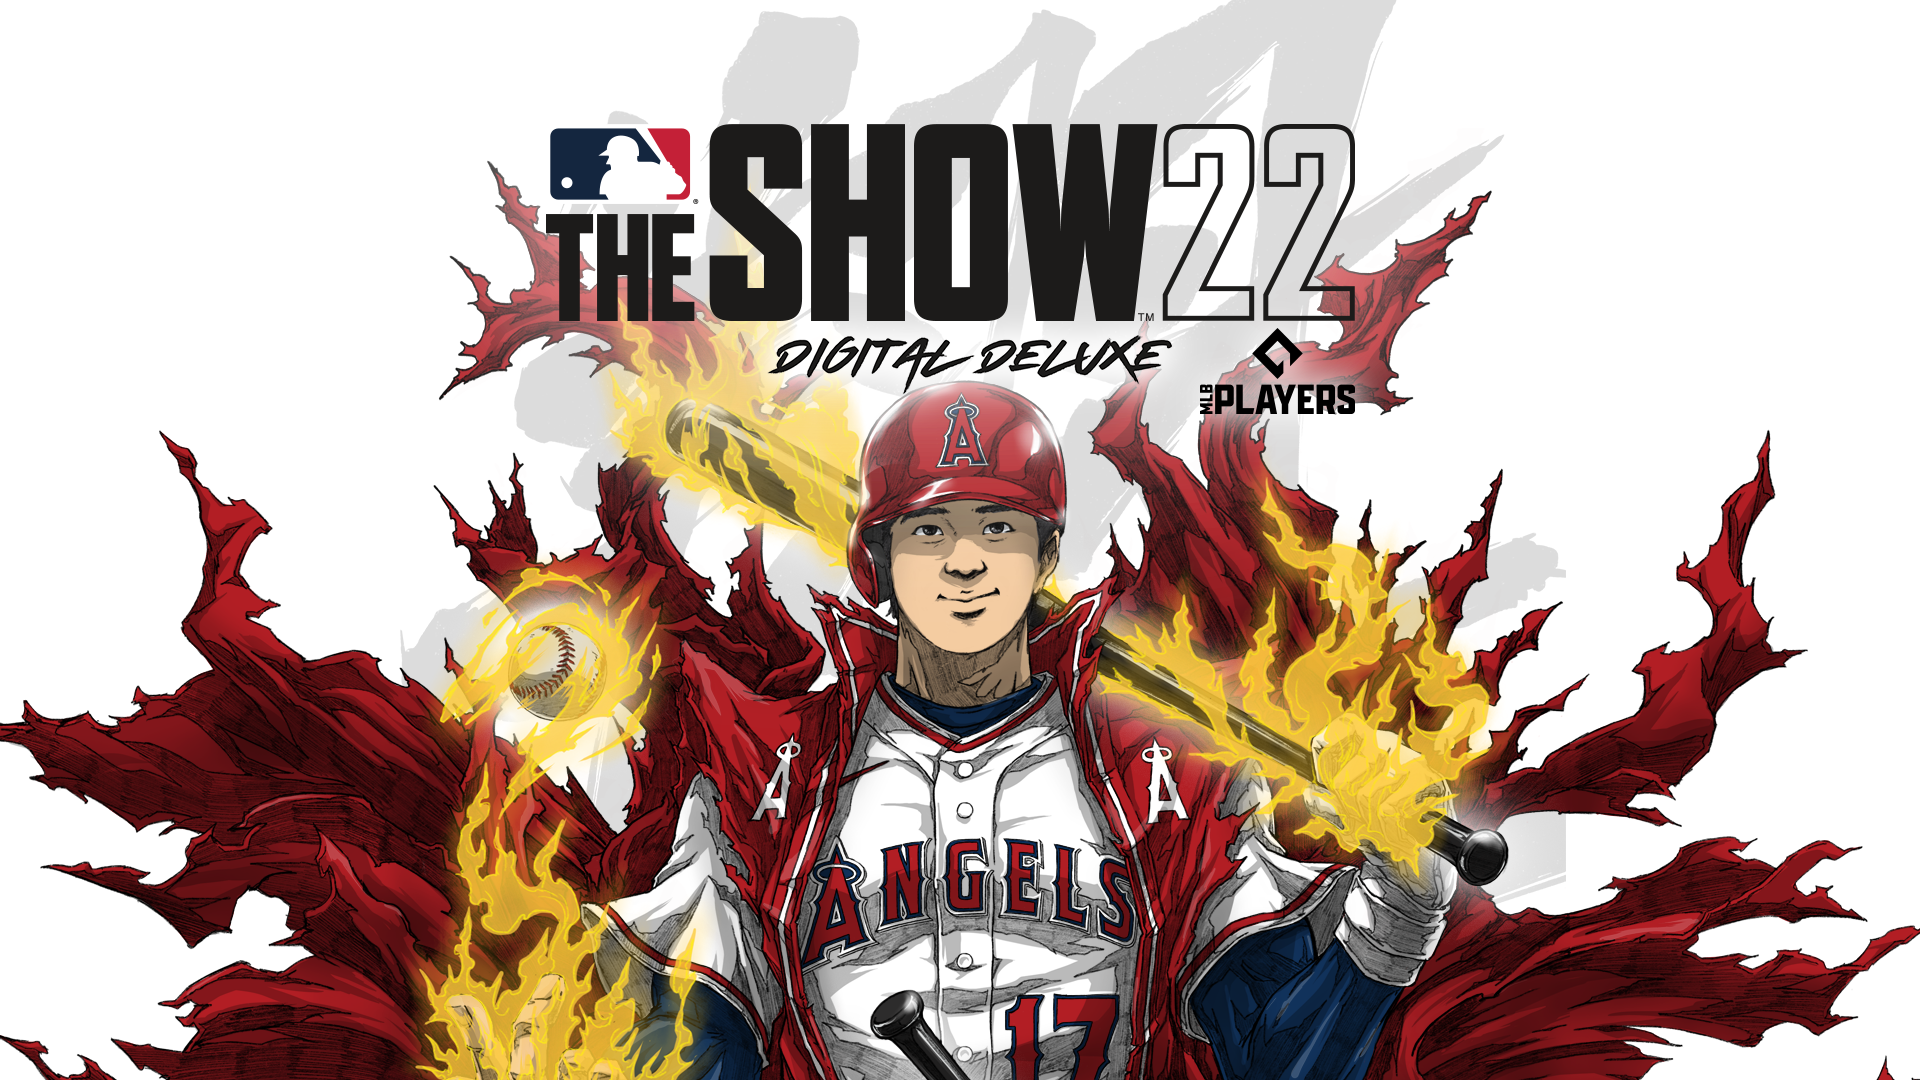 #INTERVIEW: How A Manga Inspired Portrait Of Shohei Ohtani Made It On The Cover Of MLB The Show 22